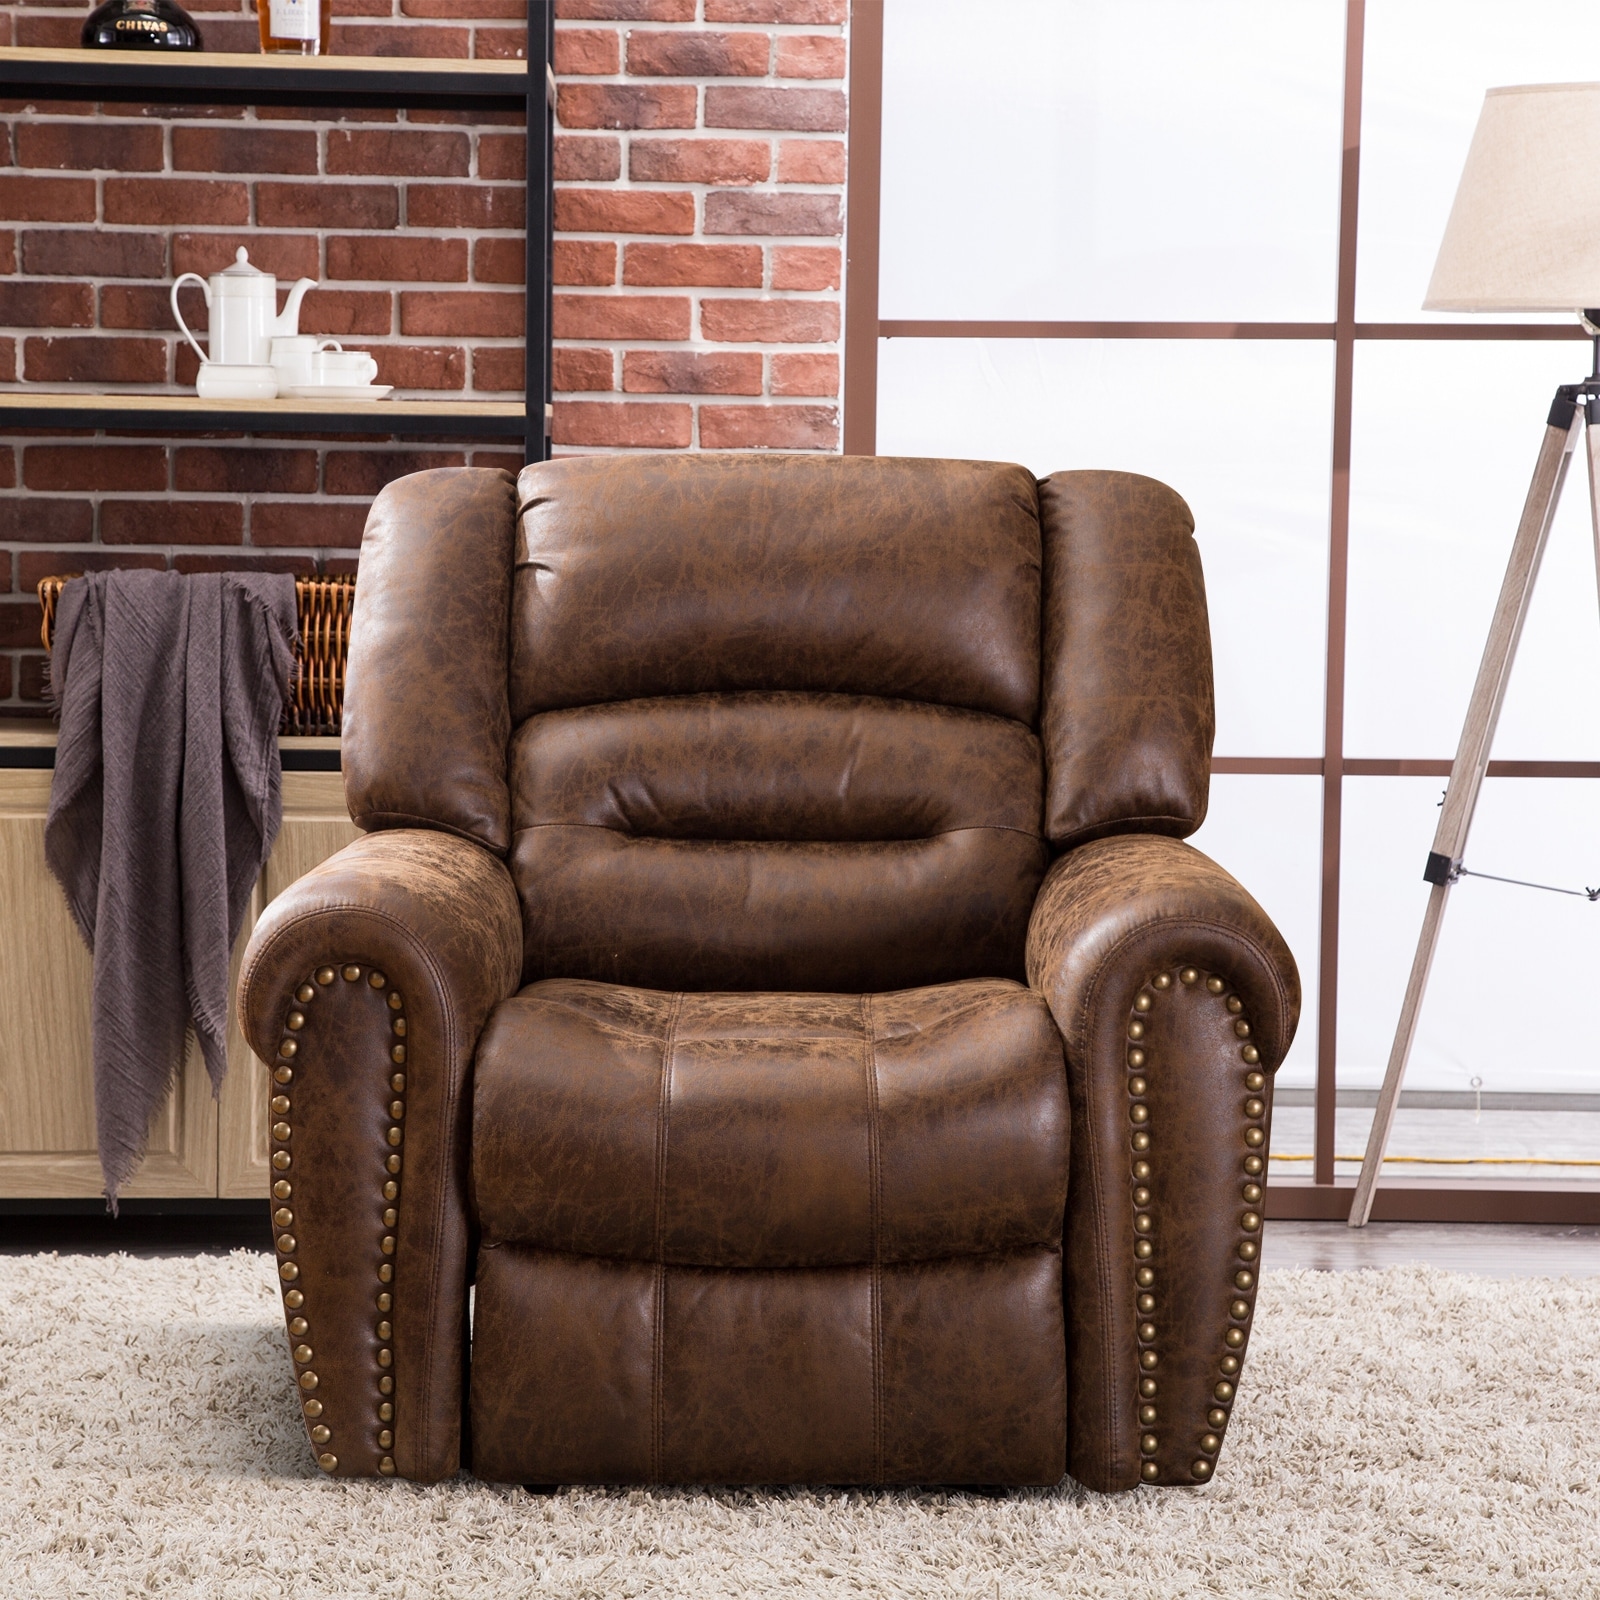 Electric Power Recliner Chair Traditional Brown Breathable Bonded Leather Sofa 